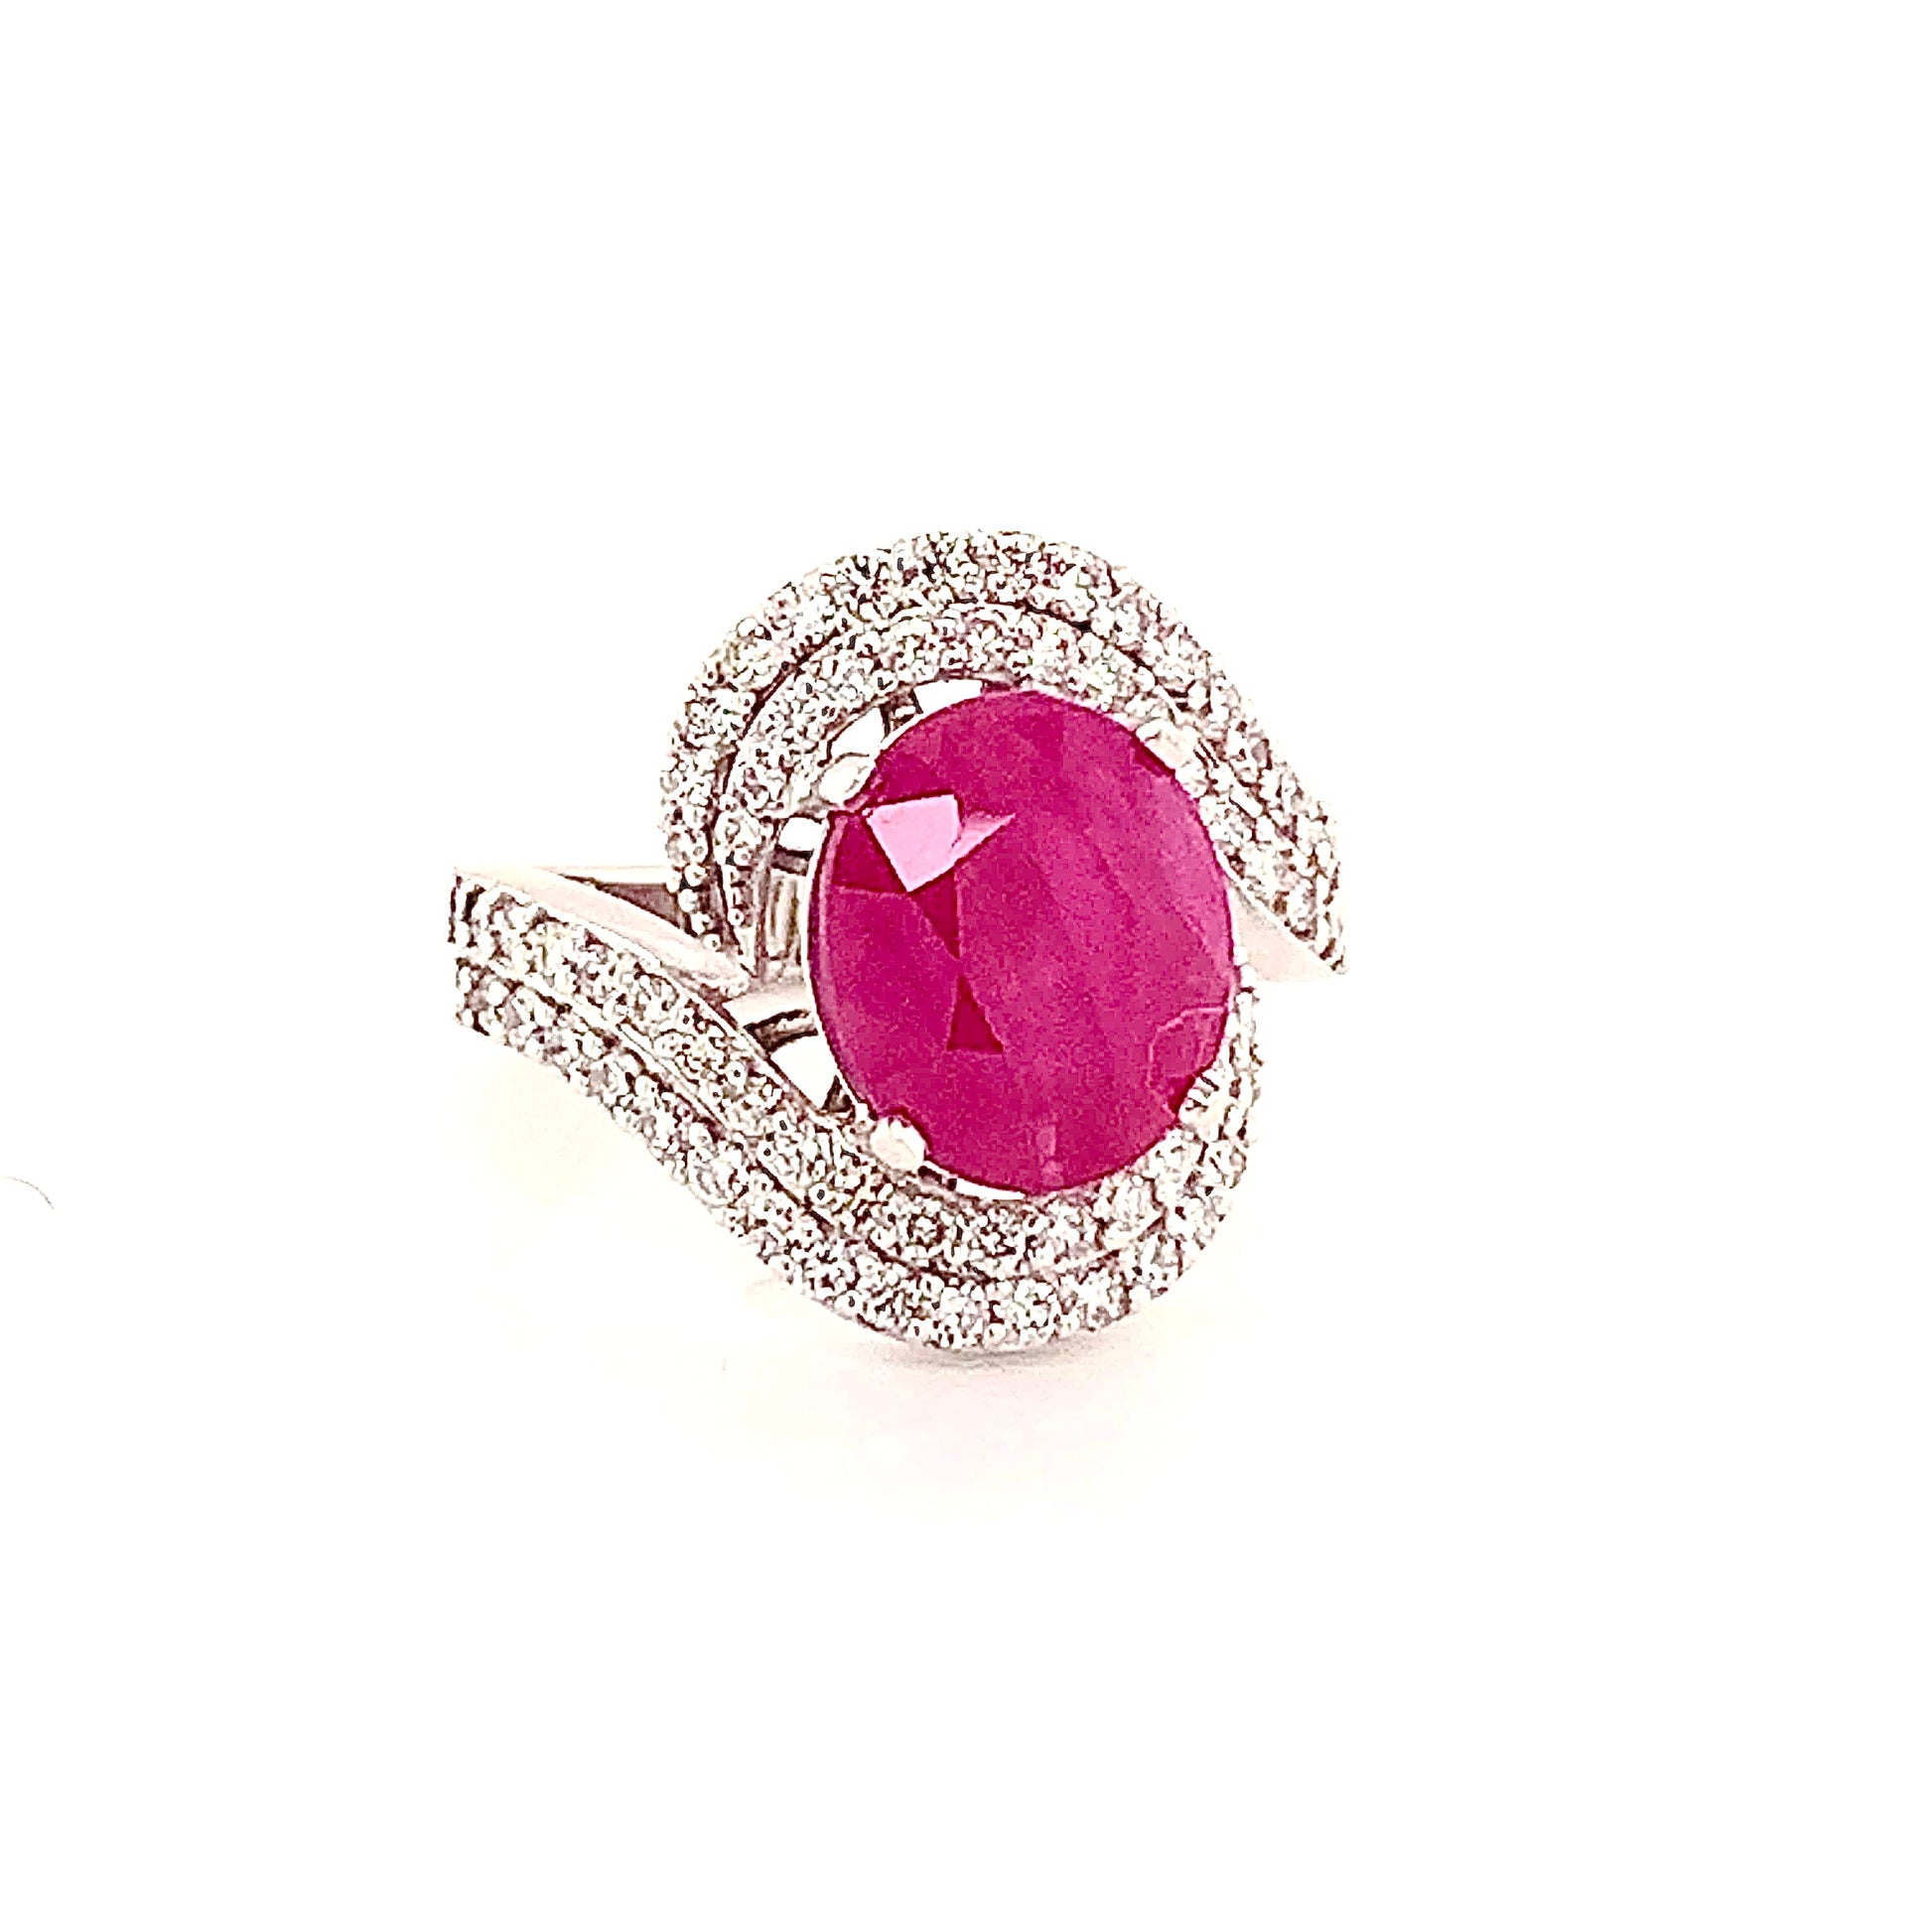 Natural Ruby Diamond Ring 14k Gold 6.32 TCW Size 6.5 GIA Certified $6,975 111872 - Certified Fine Jewelry